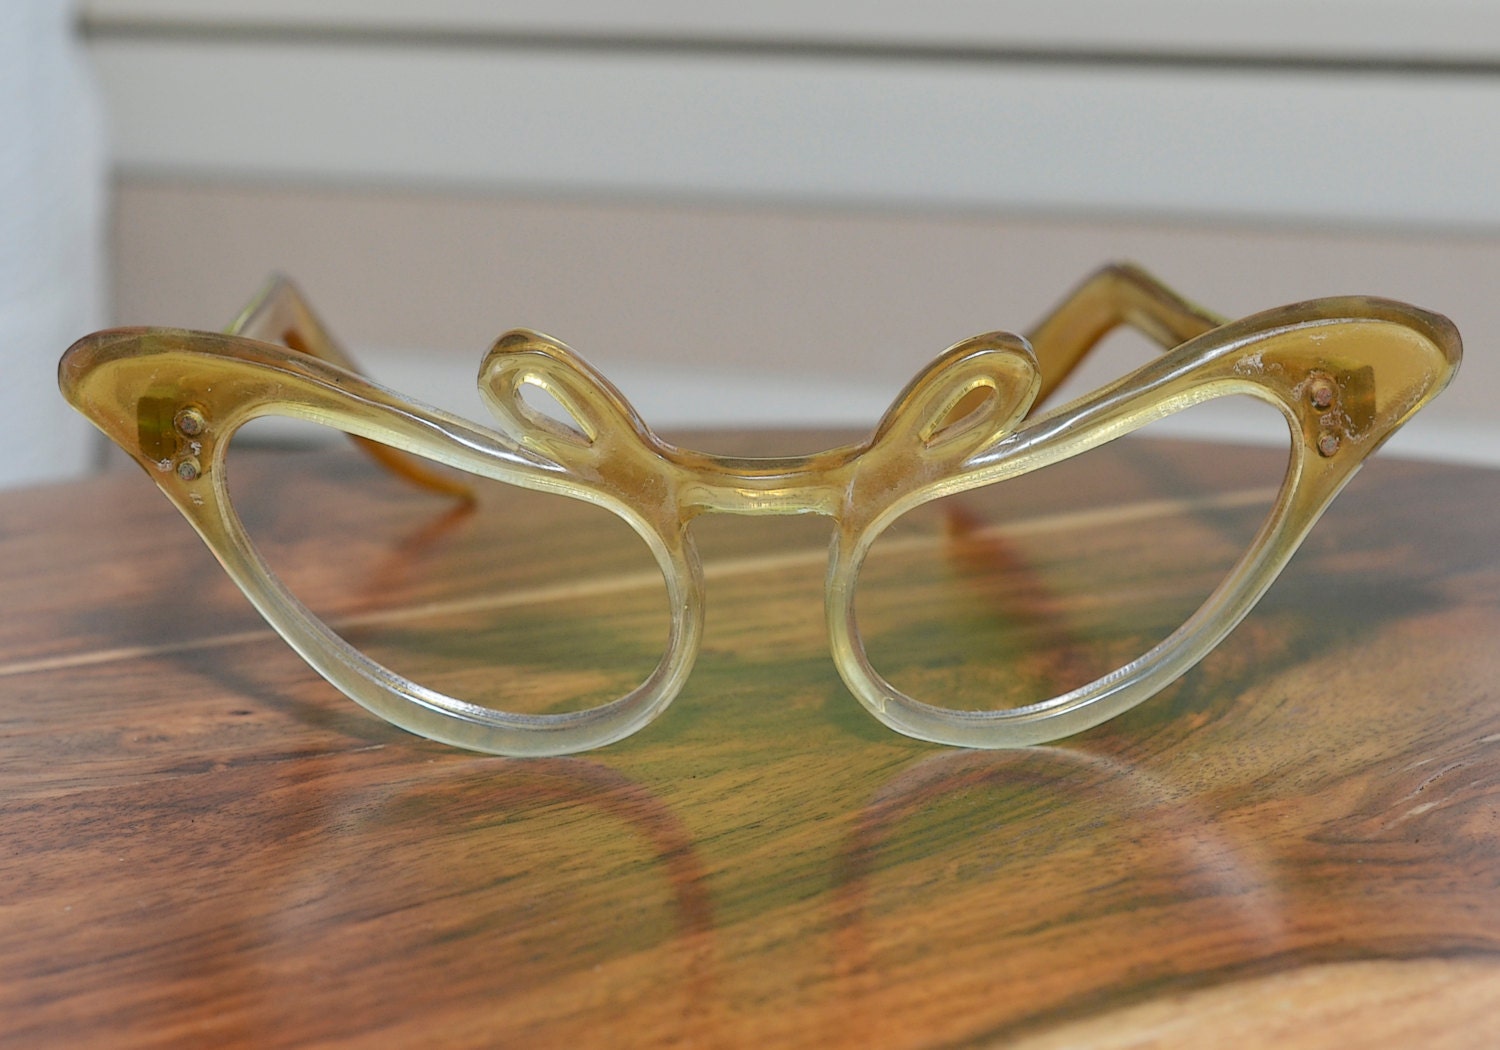 Unusual Unique Cat Eyeglasses Vintage For Collection Or